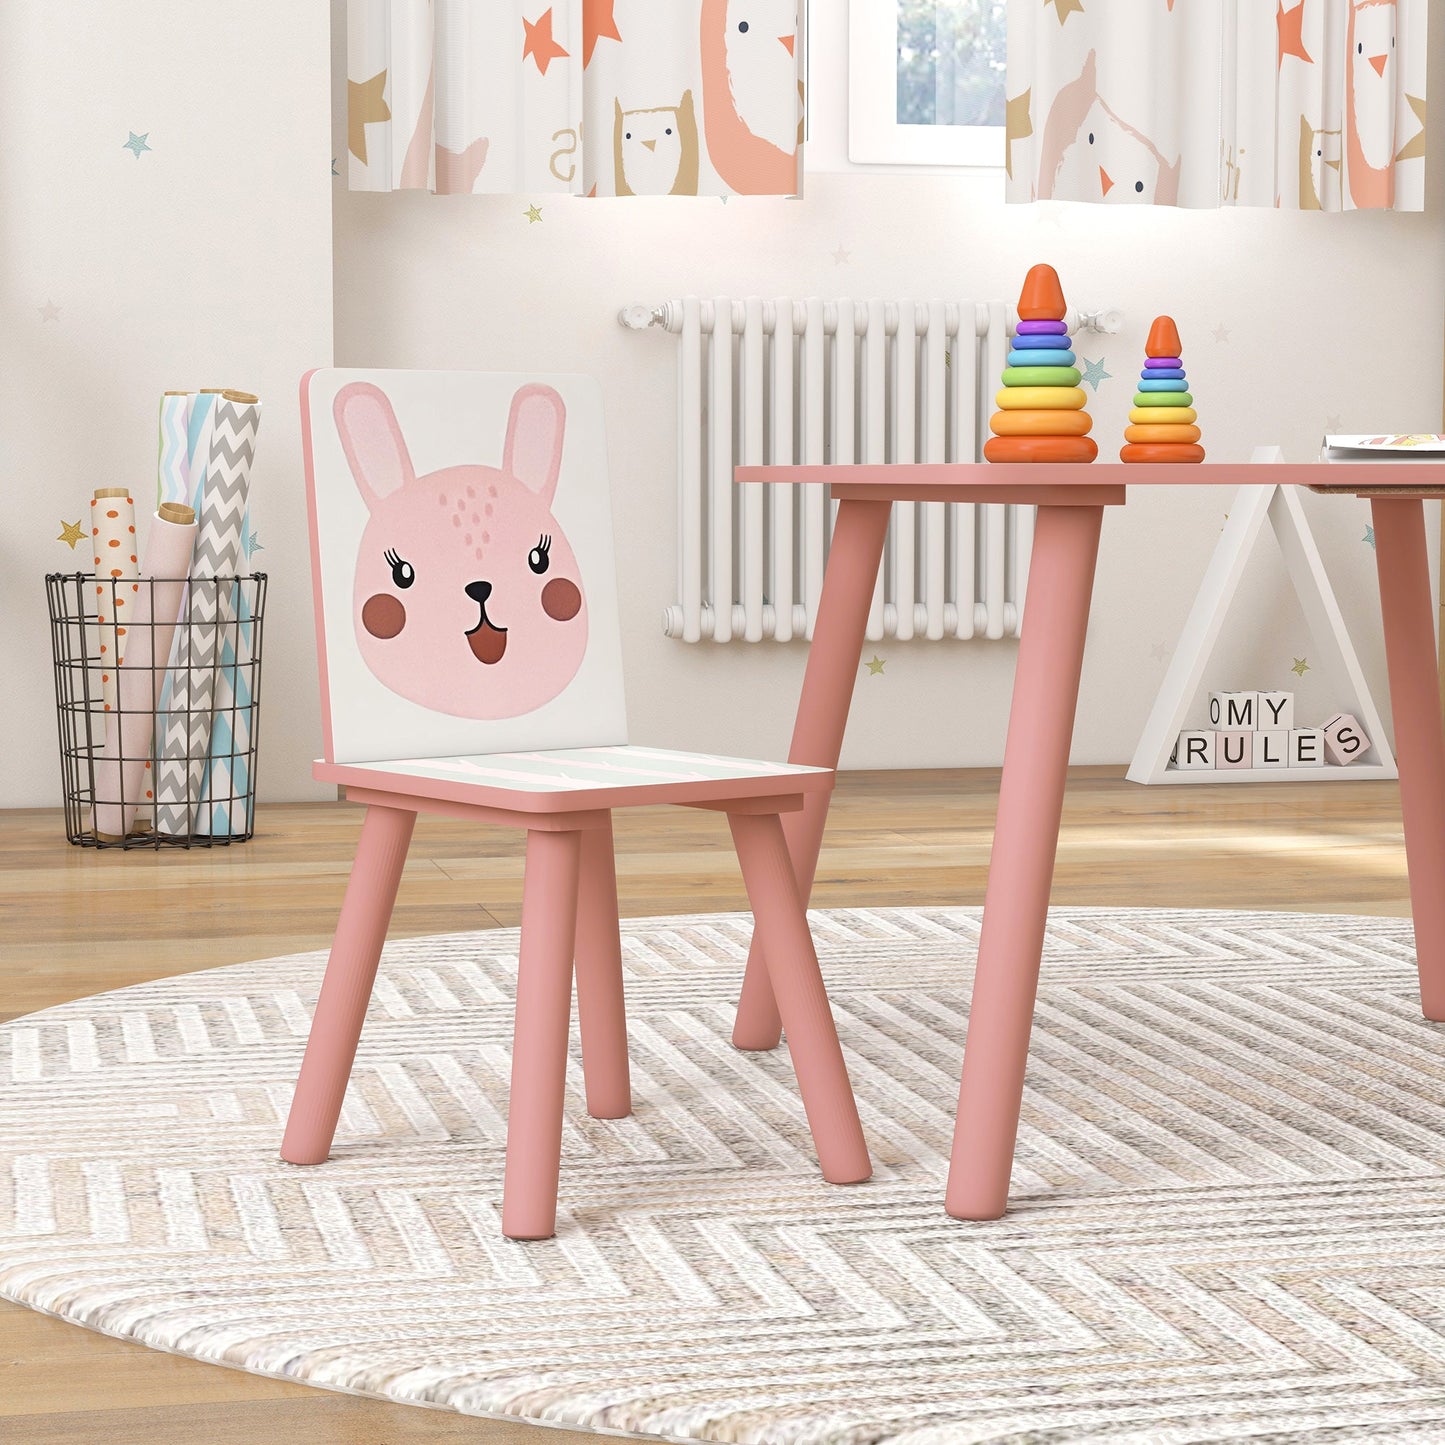 ZONEKIZ Kids Table and Chair Set and Kids Easel with Paper Roll, Storage Baskets, Kids Activity Furniture Set, Pink